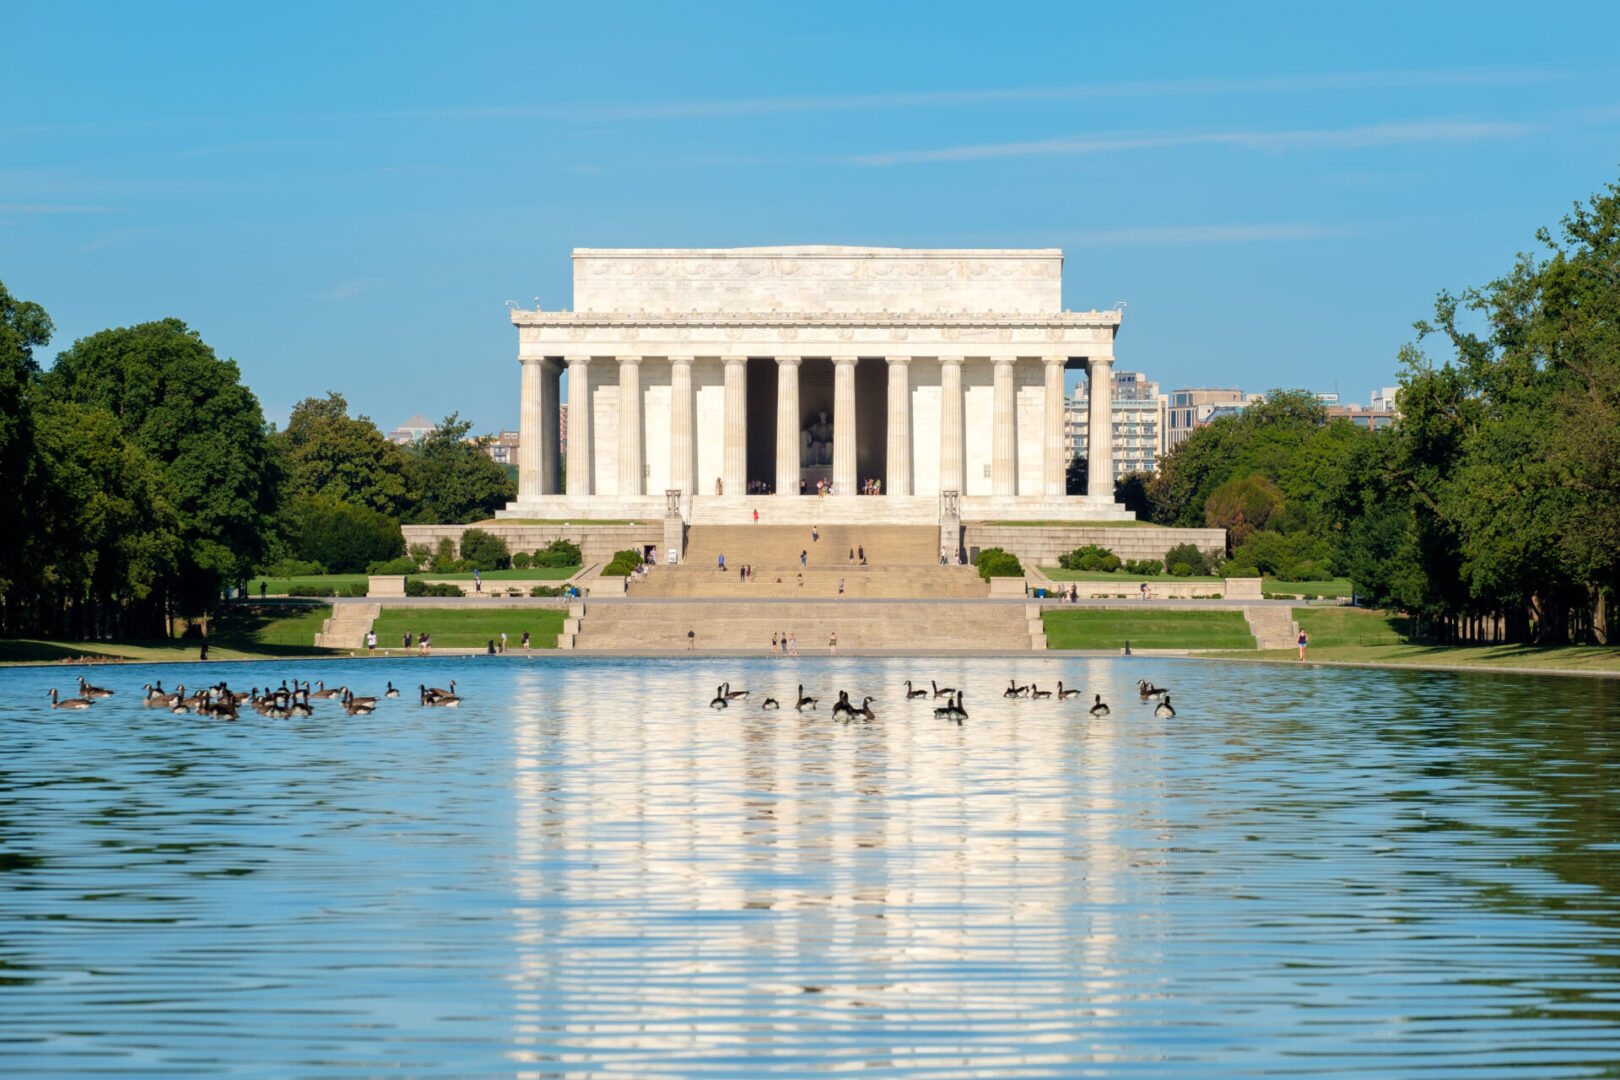 A view of the lincoln memorial from across the water.